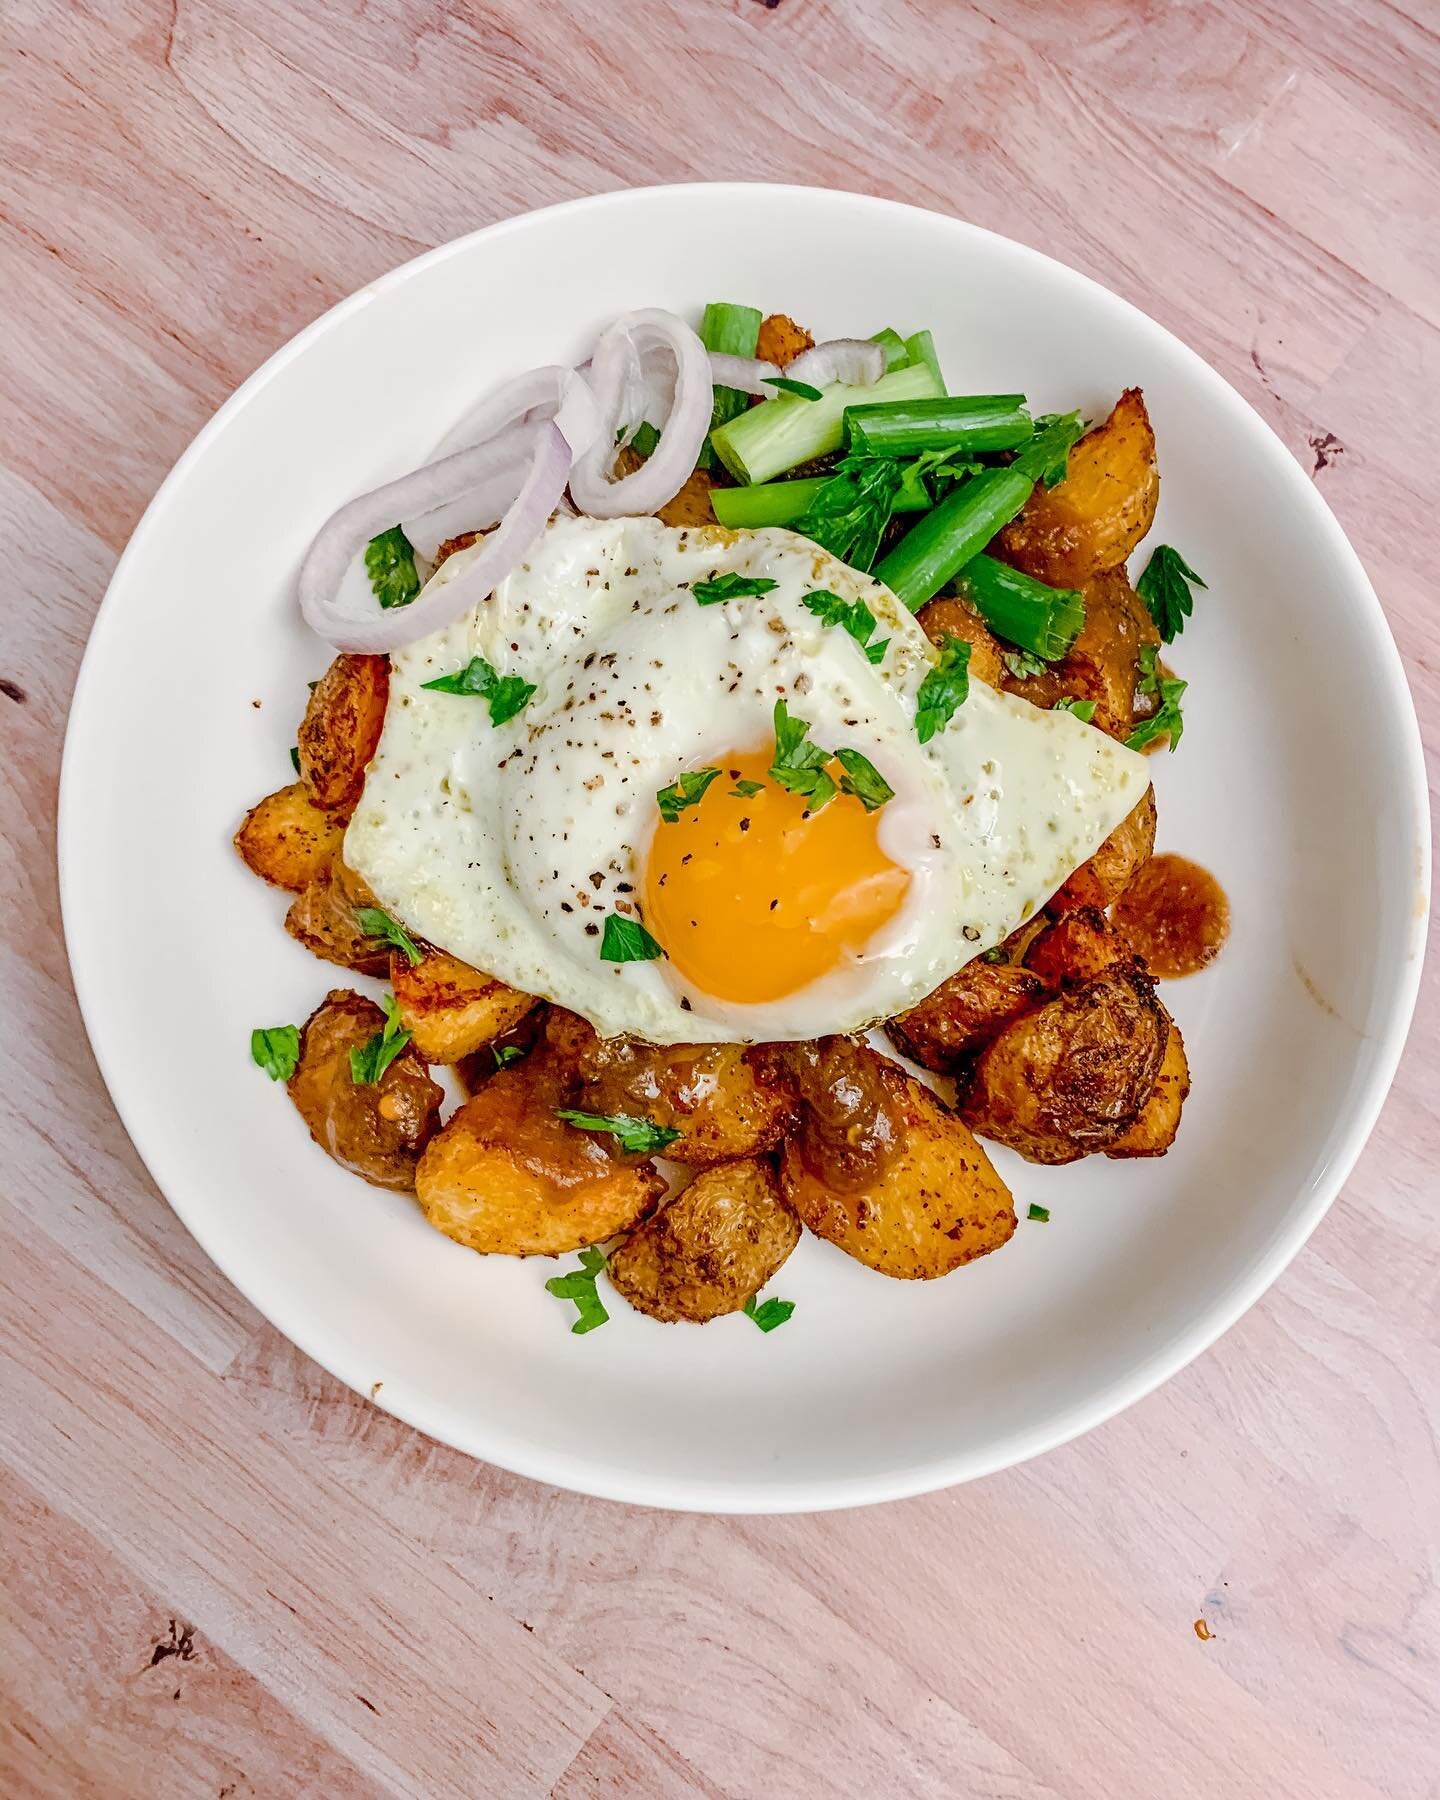 Potato bowl with a homemade tamarind sauce made by the sauce master, Joe 😉 We used @kenjilopezalt recipe for crispy potatoes (AMAZING btw). We topped it with an egg, shallots, scallions and parsley. It was my first time trying tamarind in this appli